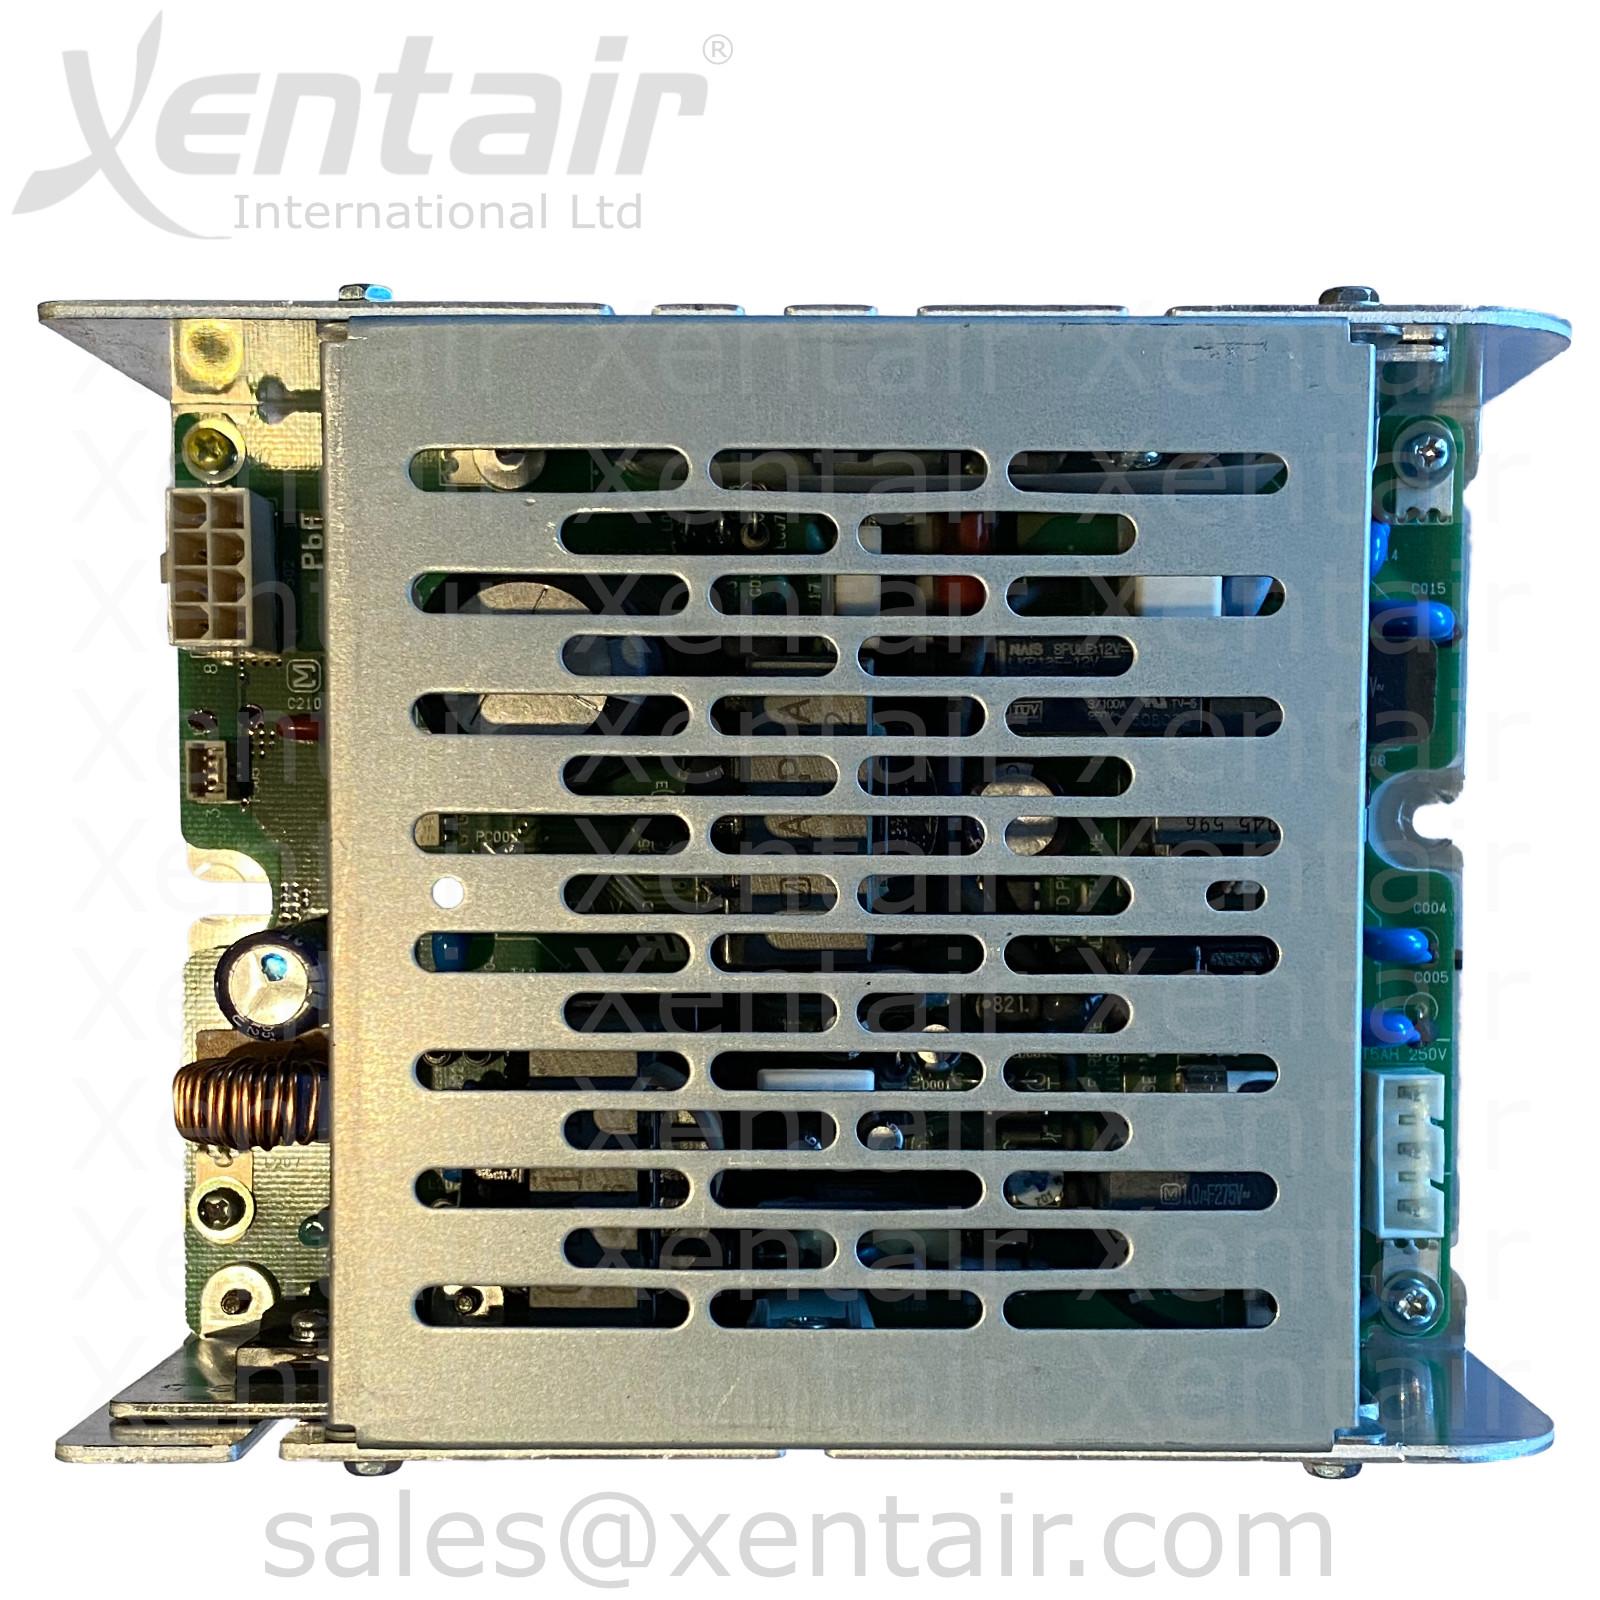 Xerox® DocuColor™ 240 242 250 252 260 IIT Low Voltage Power Supply 105E15200 105K21550